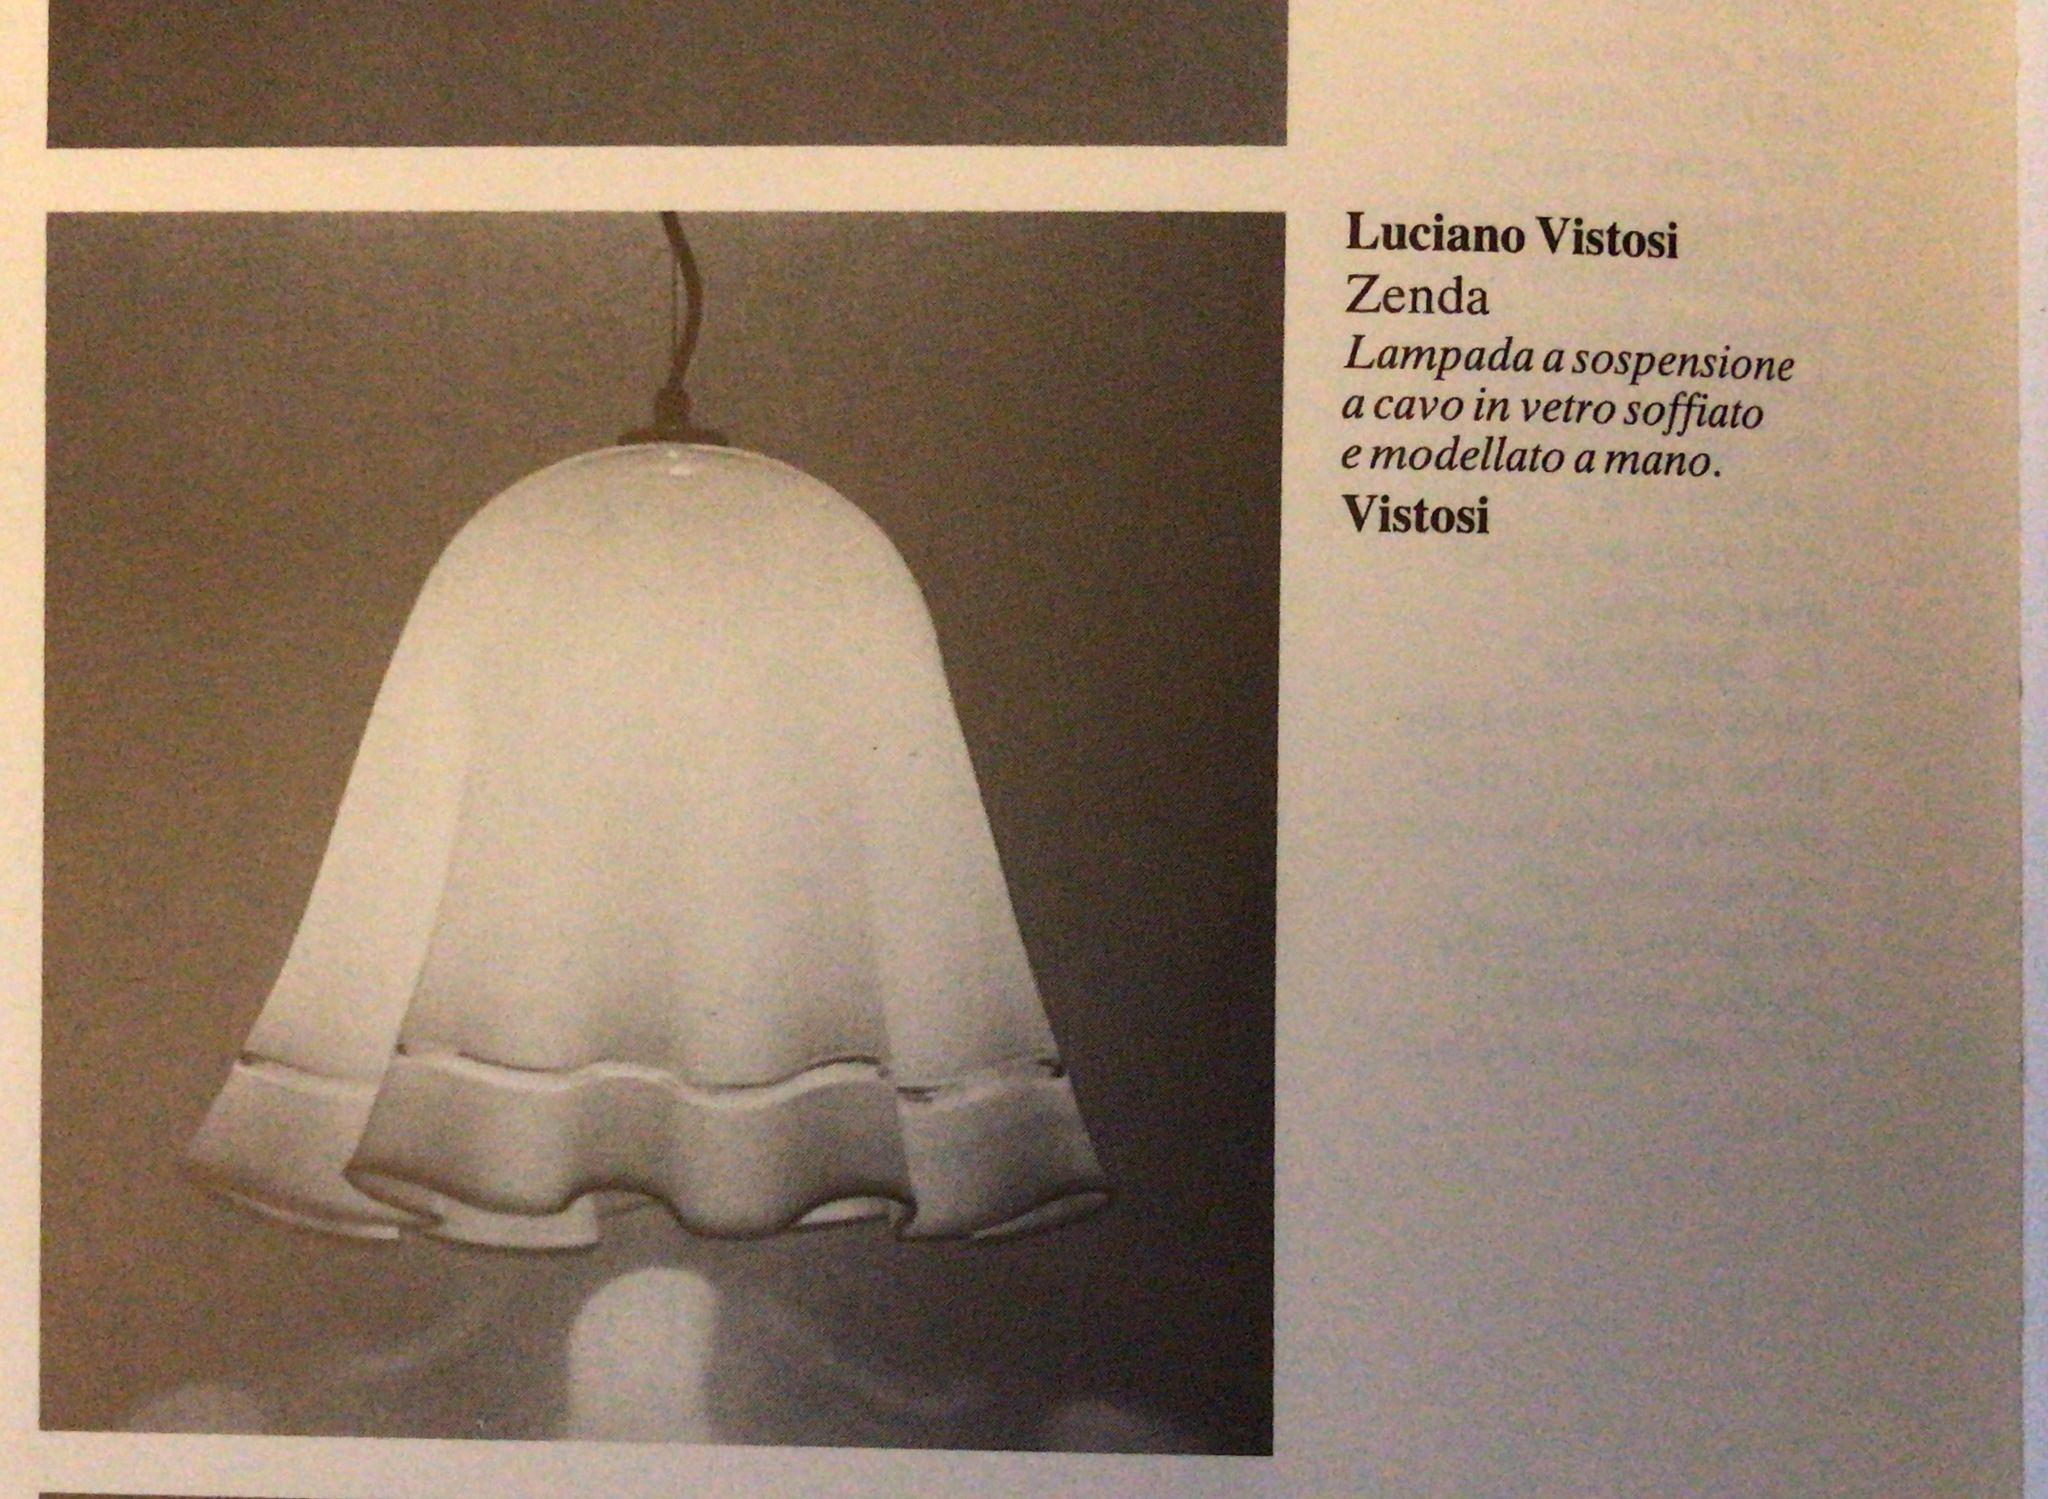 Pair of Large Zenda Murano Glass Pendant Lamps by Luciano Vistosi Italy 1965s 8